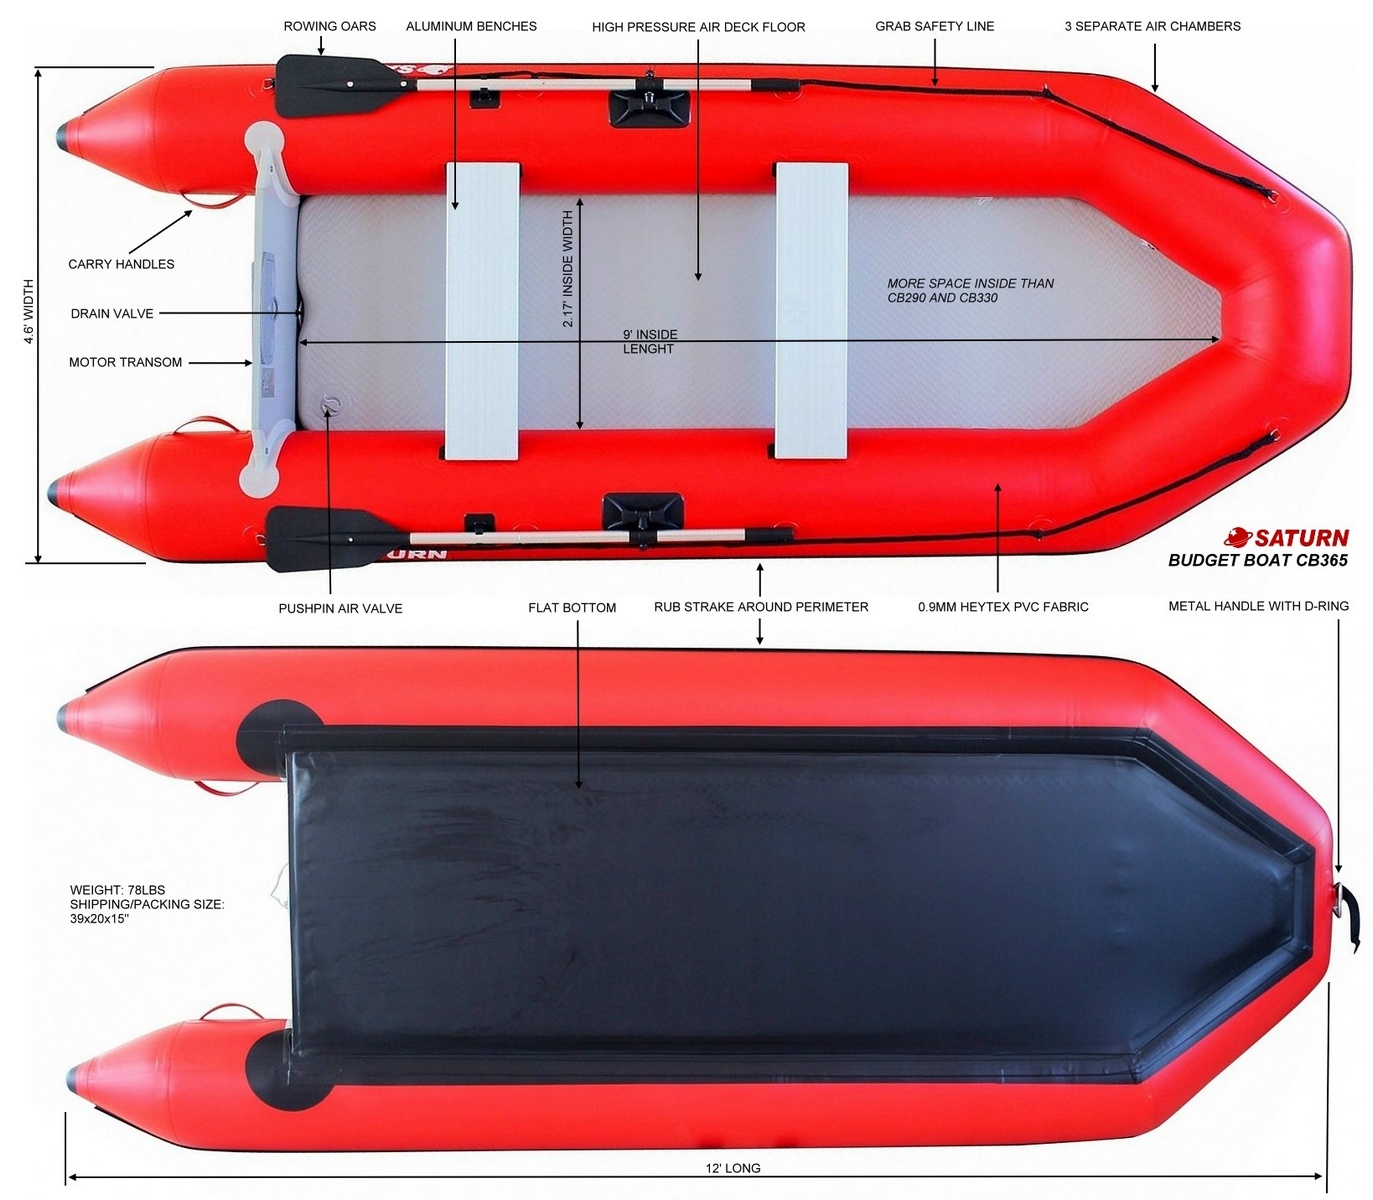 Saturn Inflatable Budget Boat CB365 Tech Specs